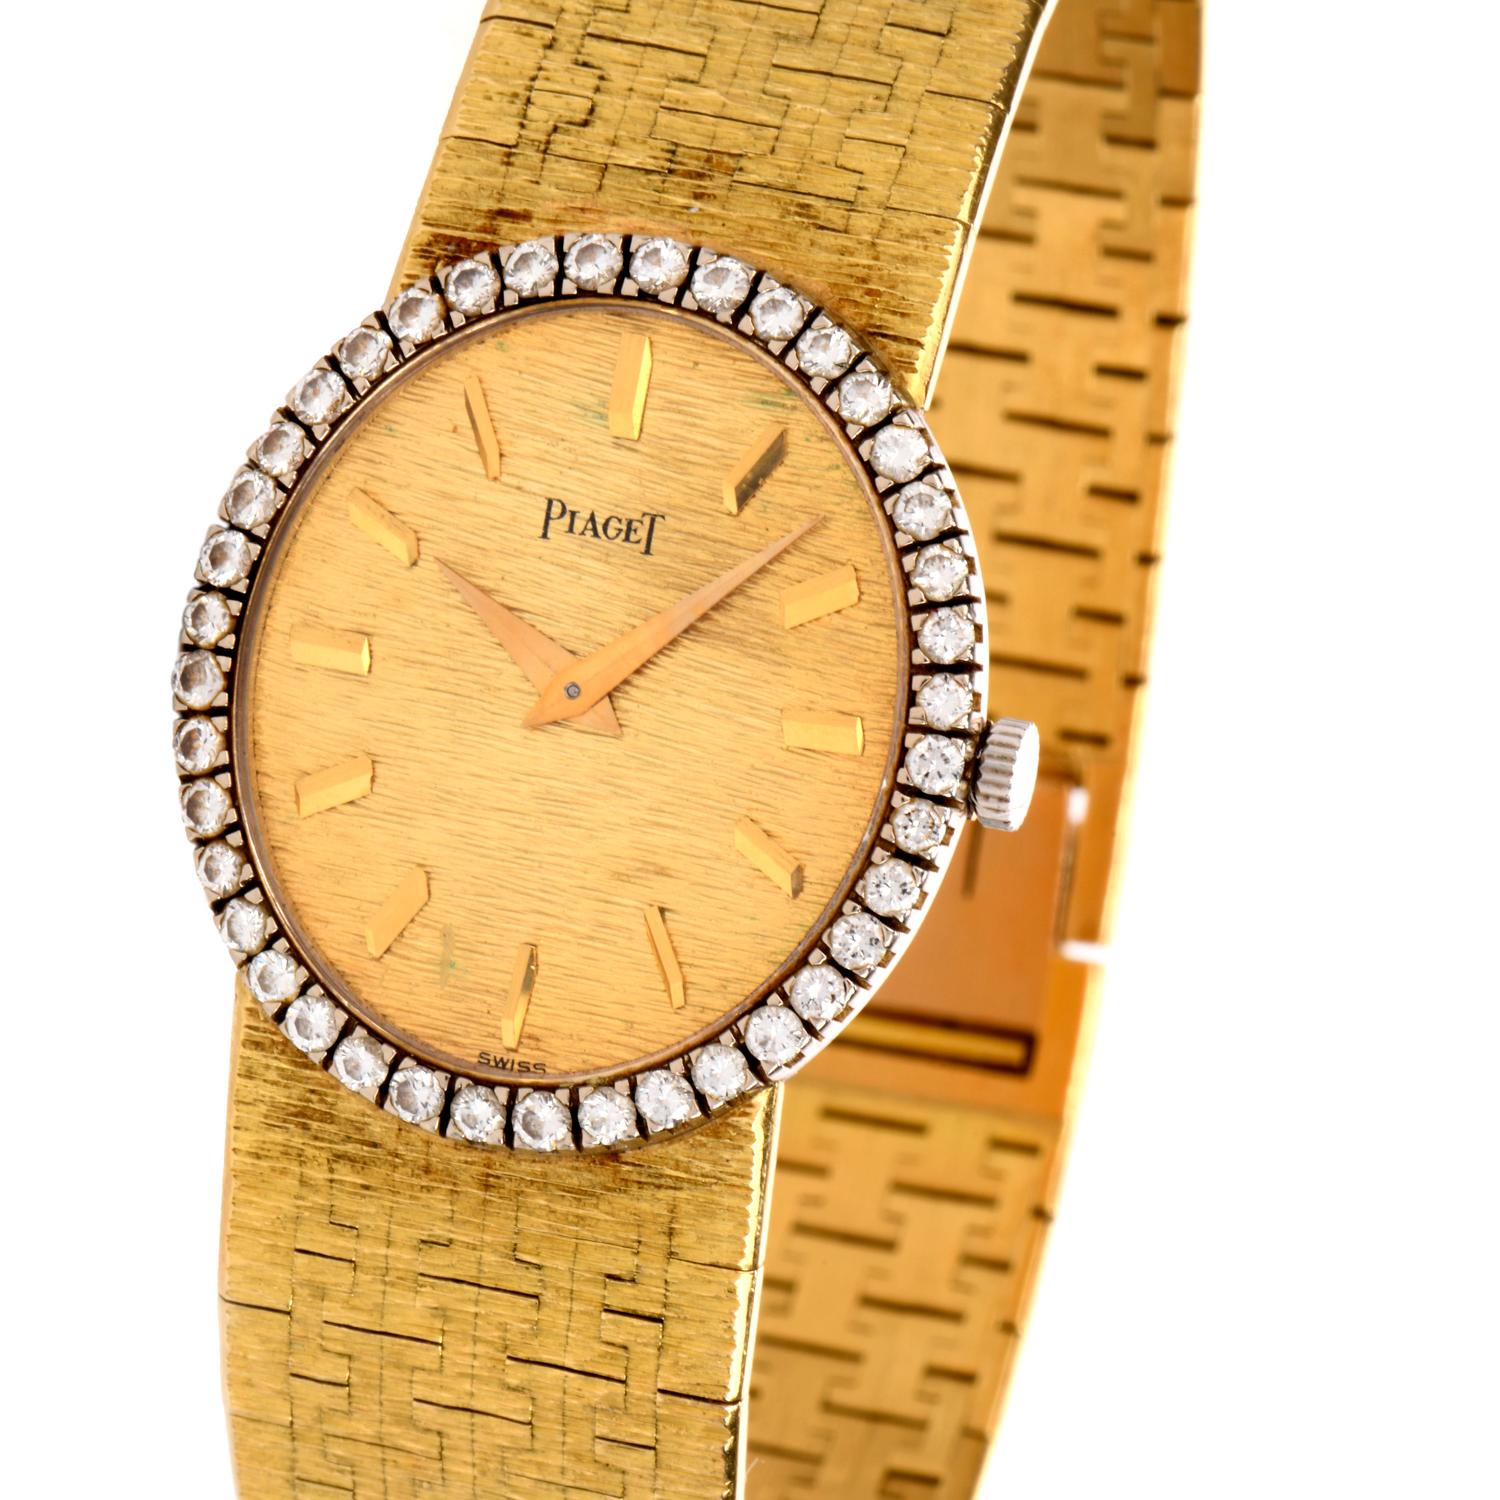 Vintage early 1980's Piaget watch crafted 18-karat yellow gold, embellished with a diamond crown.

 Dimensions: 25mm
Dial: Gold
Weight: 61 grams
Watch Movement: Mechanical Winding
Bracelet Strap: 18K Yellow Gold (measures 7 “)
Buckle: Folding
High